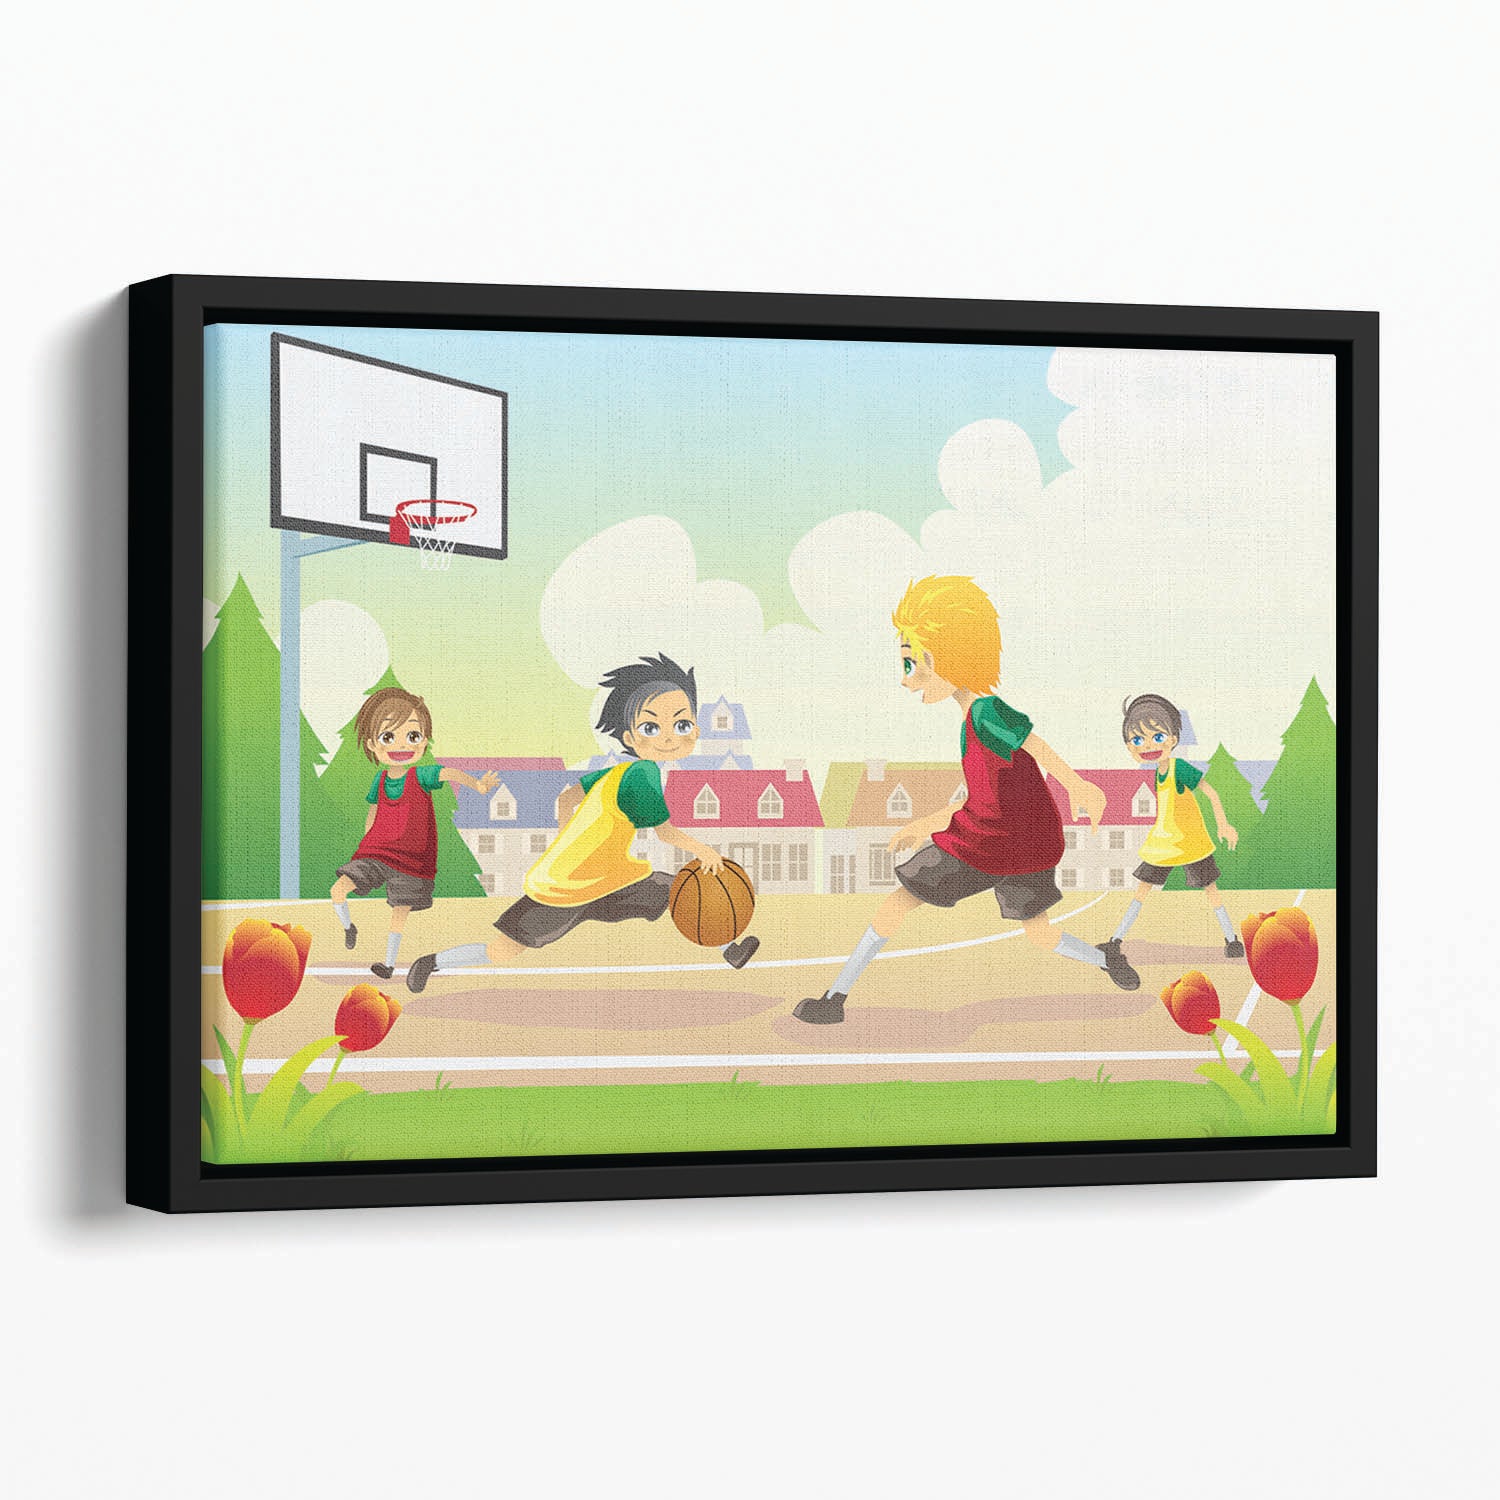 Kids playing basketball in the suburban area Floating Framed Canvas